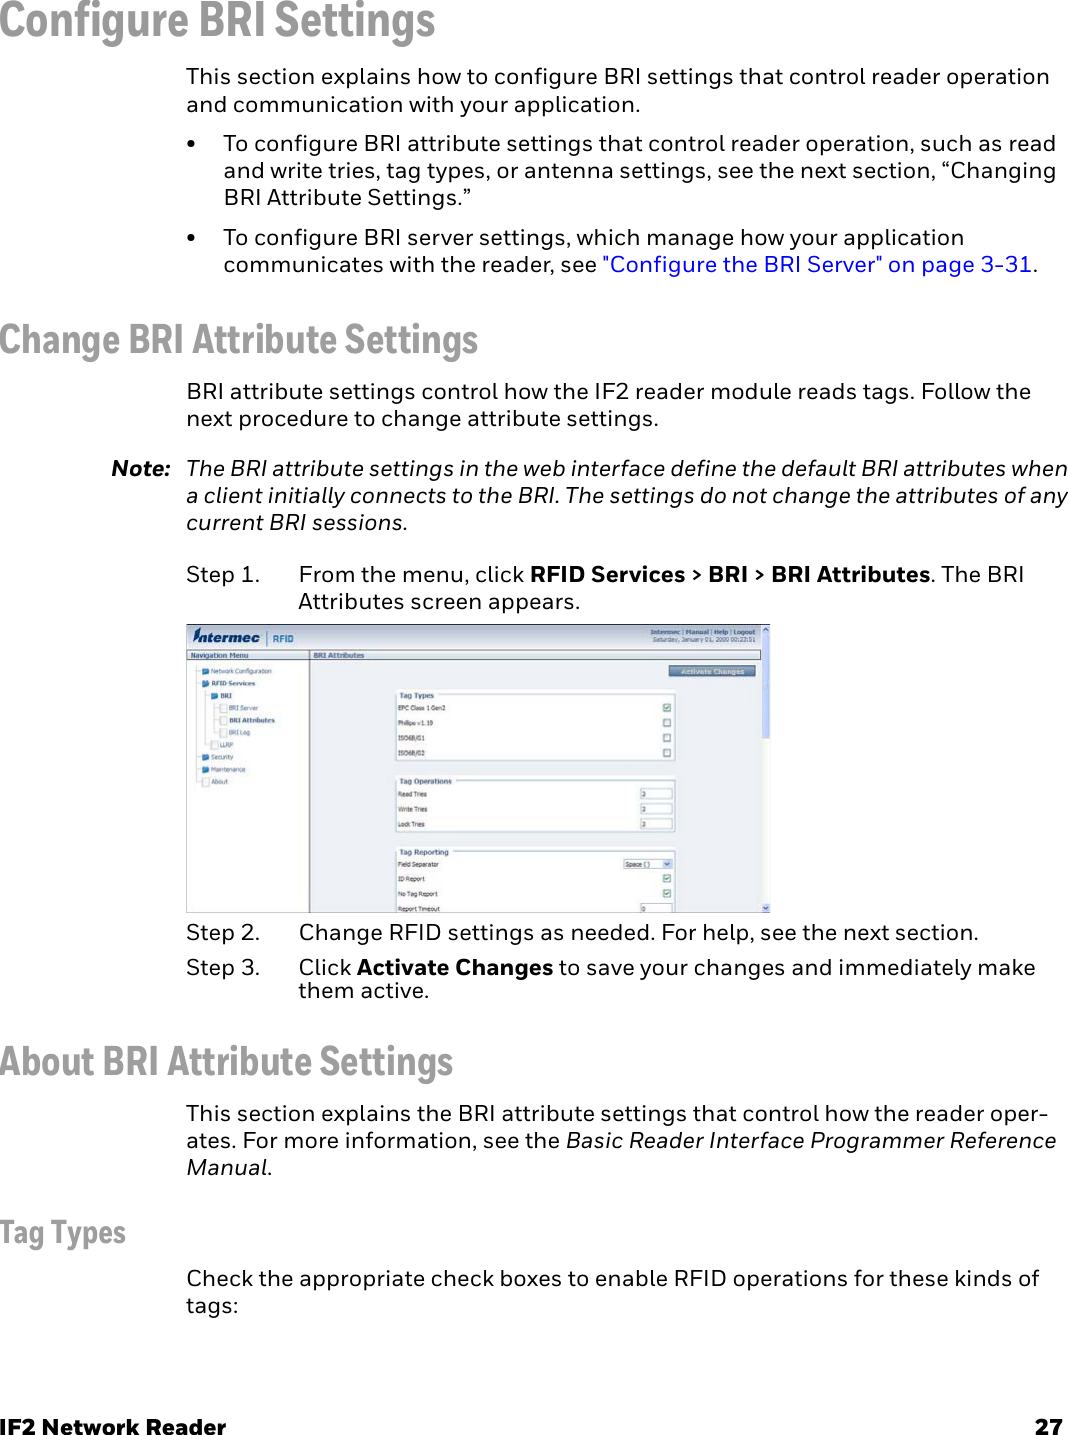 IF2 Network Reader 27Configure BRI SettingsThis section explains how to configure BRI settings that control reader operation and communication with your application.• To configure BRI attribute settings that control reader operation, such as read and write tries, tag types, or antenna settings, see the next section, “Changing BRI Attribute Settings.”• To configure BRI server settings, which manage how your application communicates with the reader, see &quot;Configure the BRI Server&quot; on page 3-31.Change BRI Attribute SettingsBRI attribute settings control how the IF2 reader module reads tags. Follow the next procedure to change attribute settings.Note: The BRI attribute settings in the web interface define the default BRI attributes when a client initially connects to the BRI. The settings do not change the attributes of any current BRI sessions.Step 1. From the menu, click RFID Services &gt; BRI &gt; BRI Attributes. The BRI Attributes screen appears.Step 2. Change RFID settings as needed. For help, see the next section.Step 3. Click Activate Changes to save your changes and immediately make them active.About BRI Attribute SettingsThis section explains the BRI attribute settings that control how the reader oper-ates. For more information, see the Basic Reader Interface Programmer Reference Manual.Tag TypesCheck the appropriate check boxes to enable RFID operations for these kinds of tags: